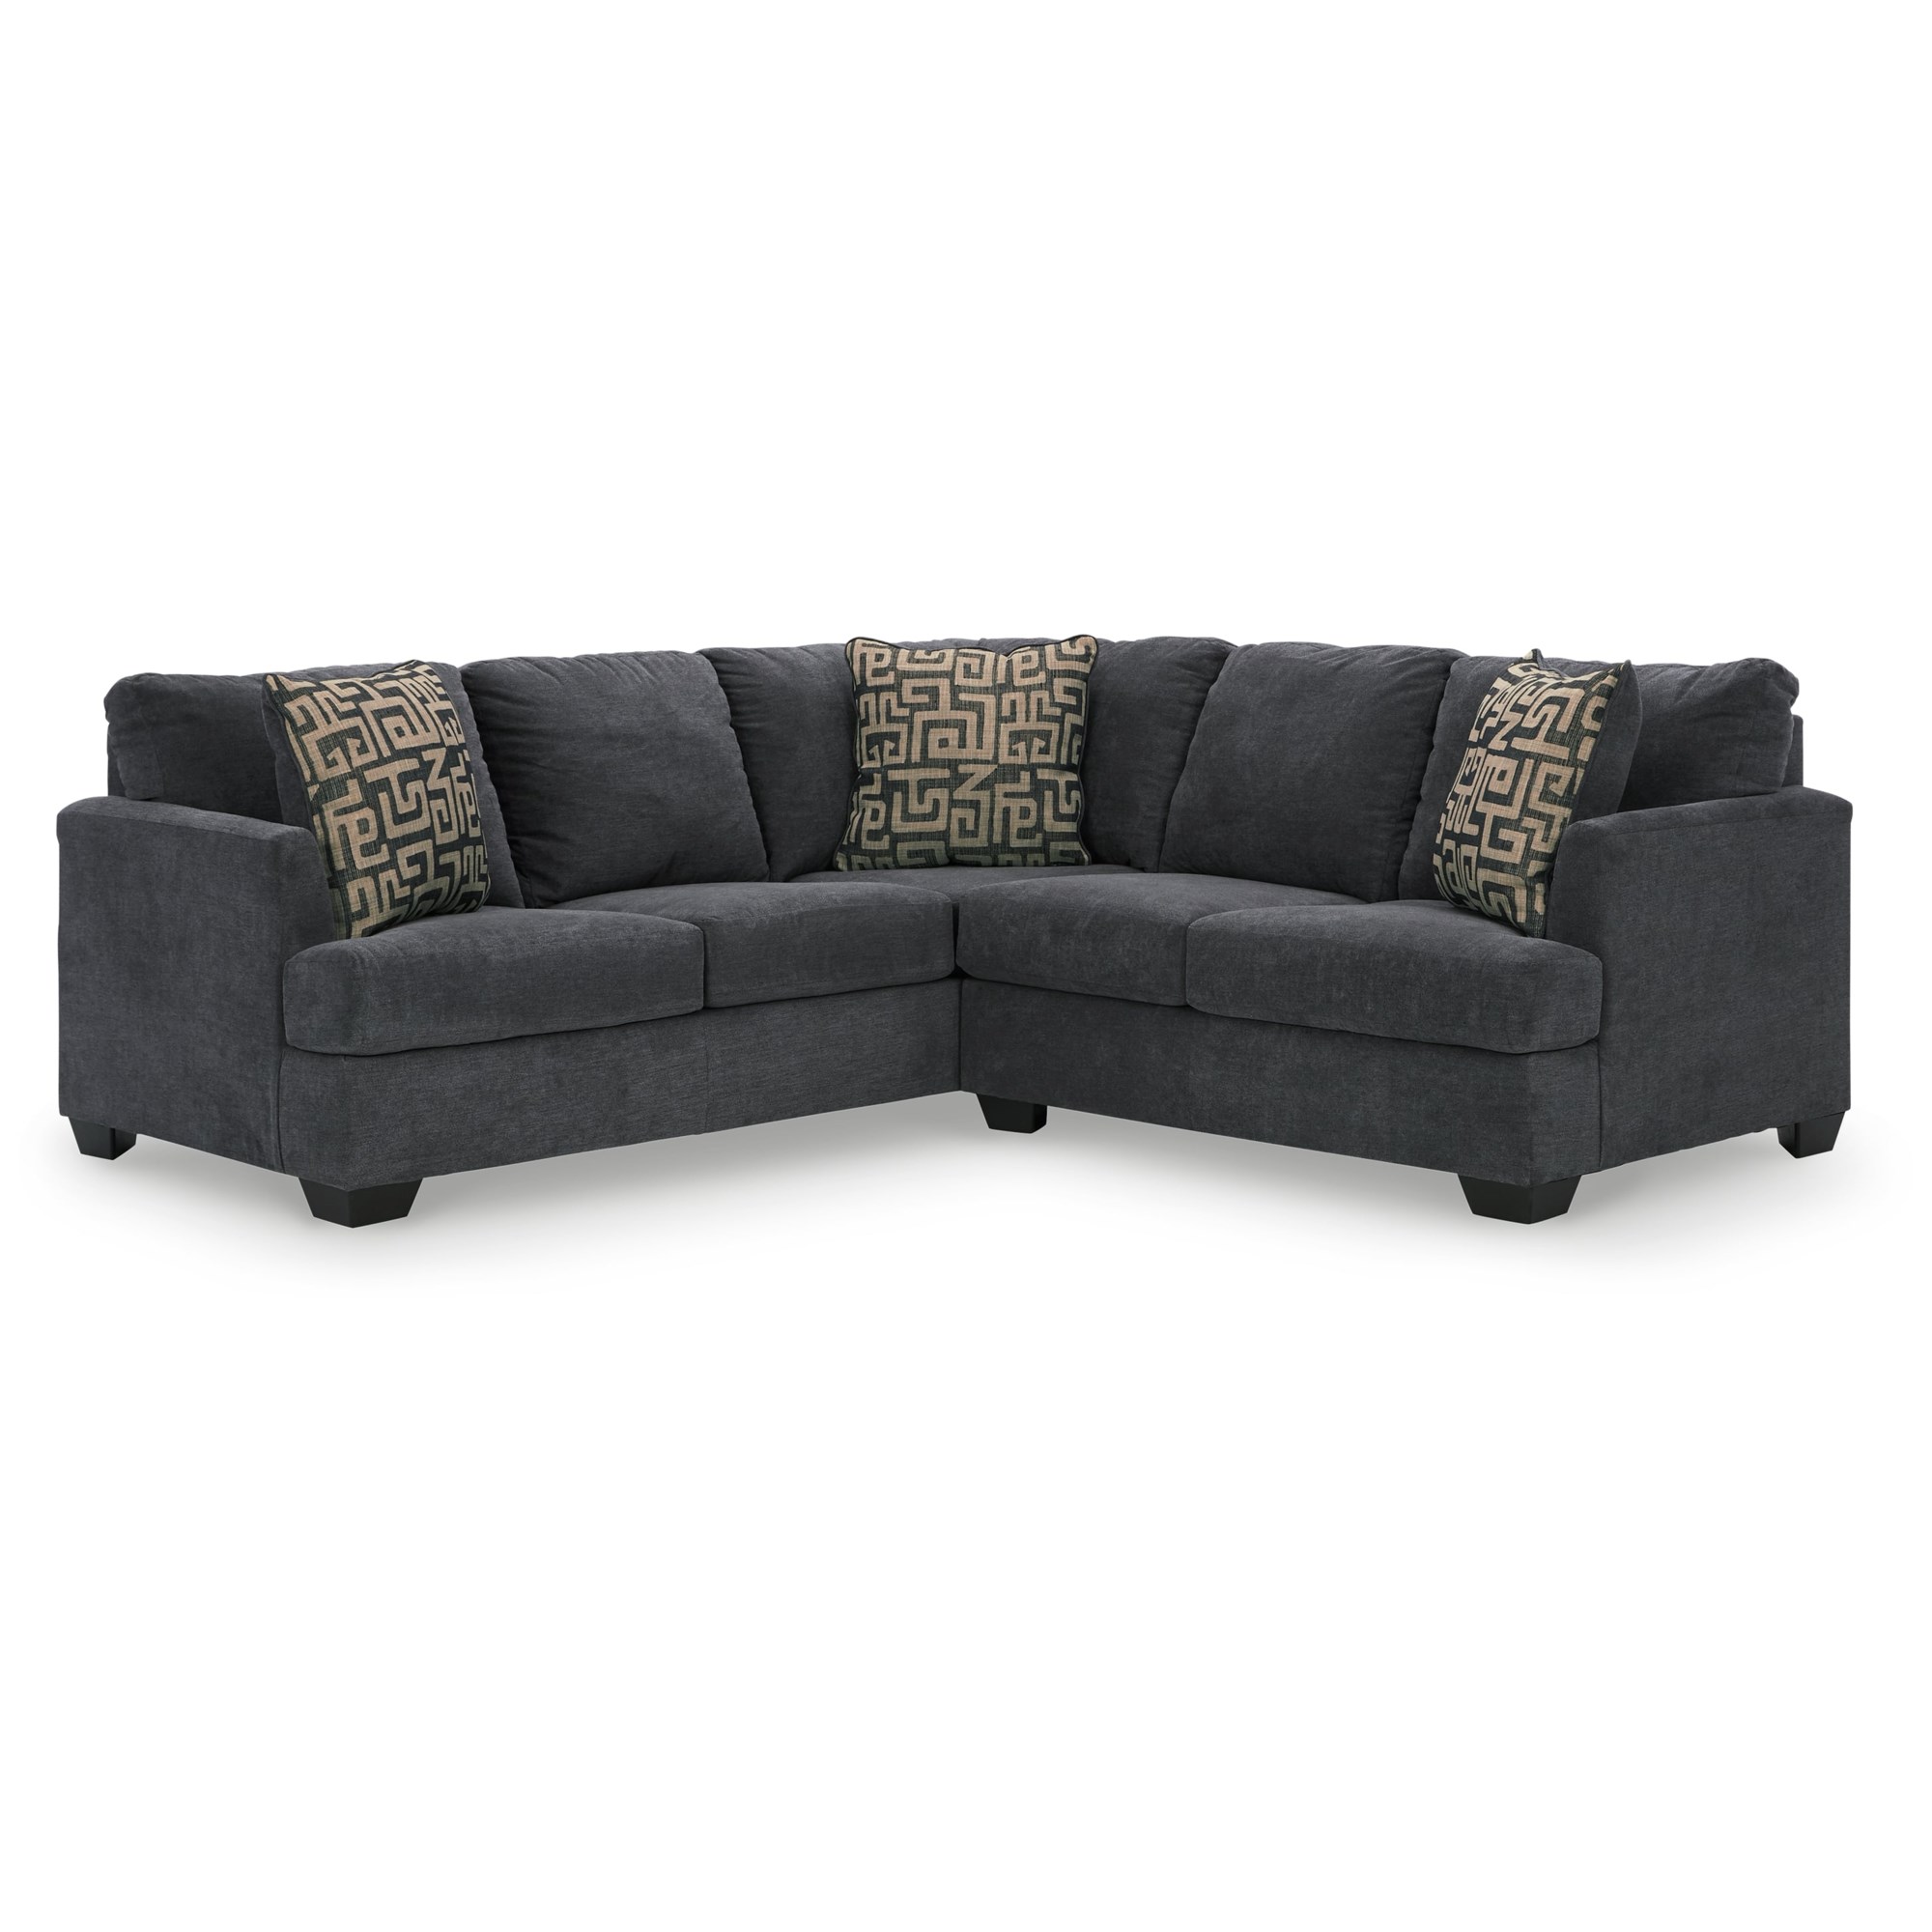 Benchcraft Ambrielle 11902S1 Contemporary 2-Piece Sectional Sofa, Virginia  Furniture Market